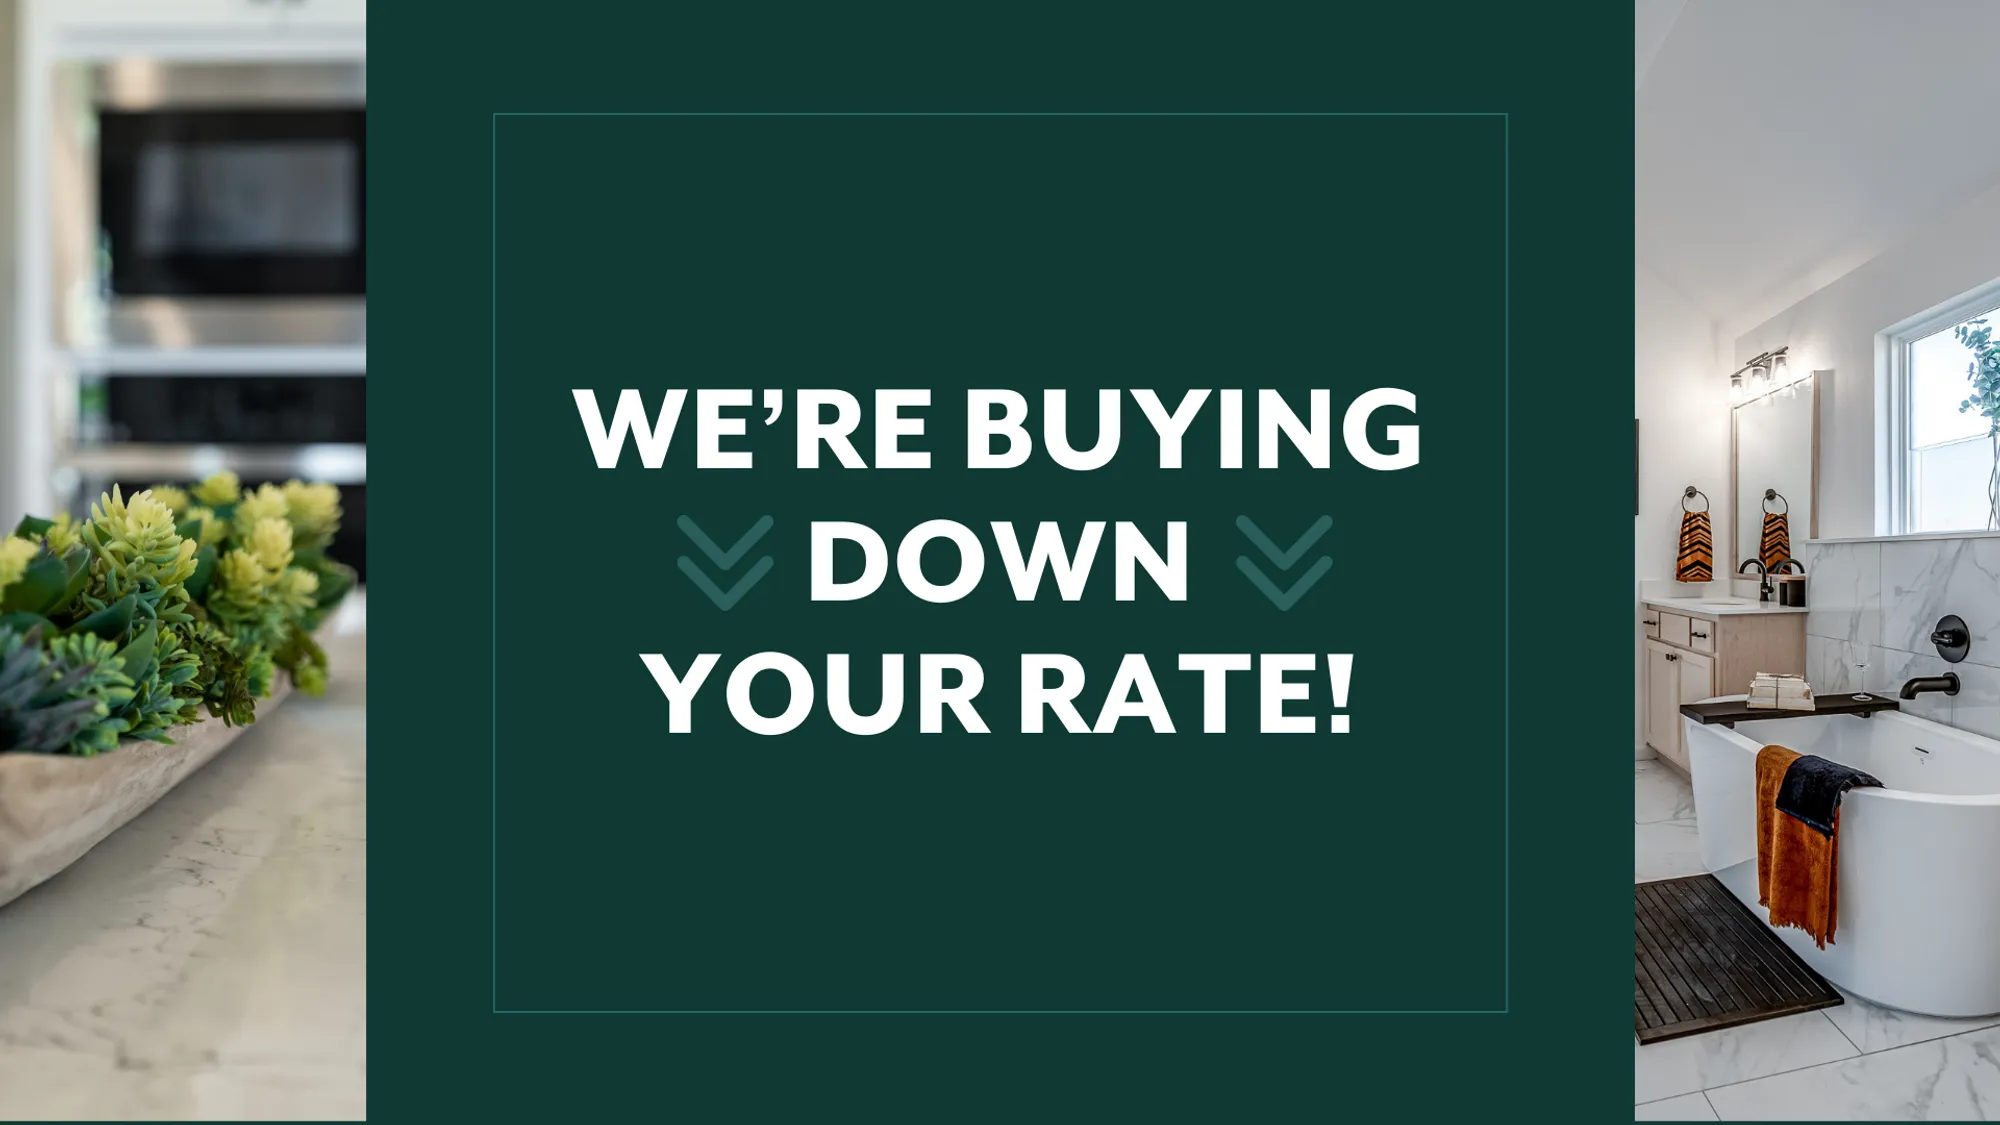 We're buying down your rate!